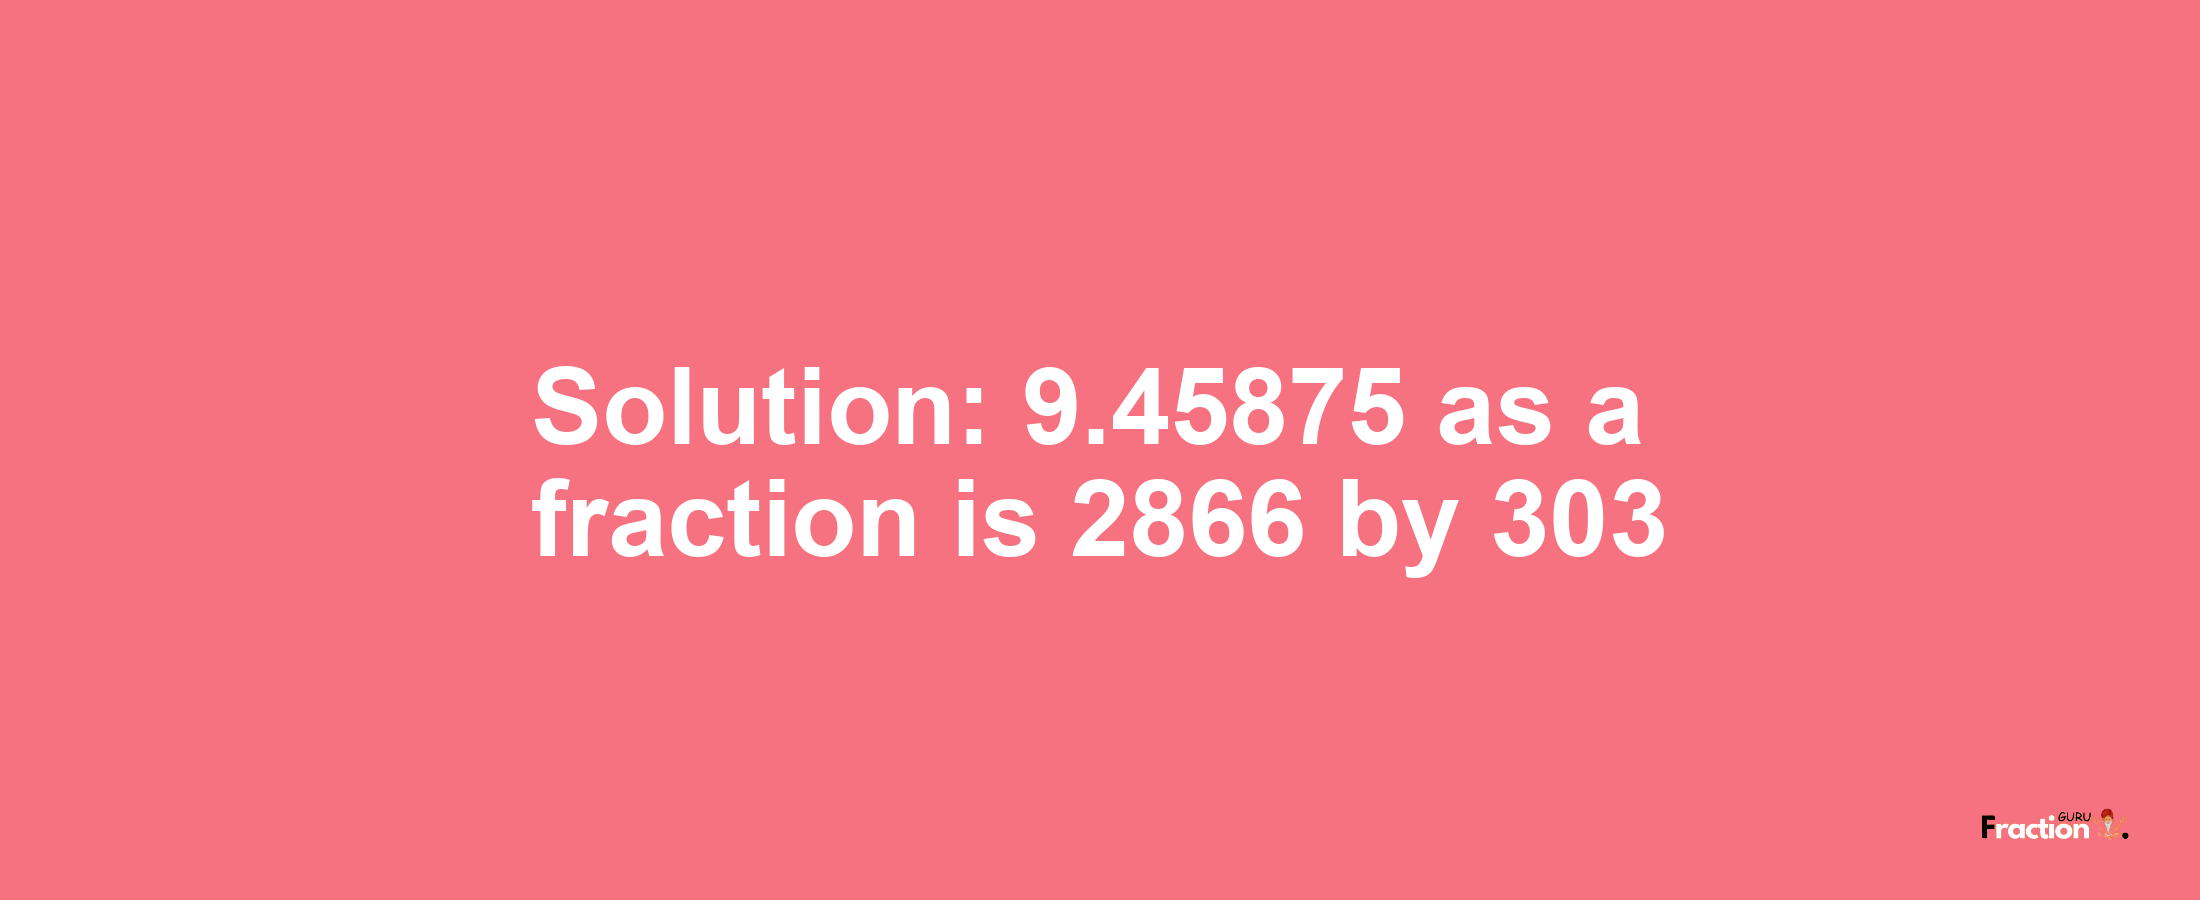 Solution:9.45875 as a fraction is 2866/303